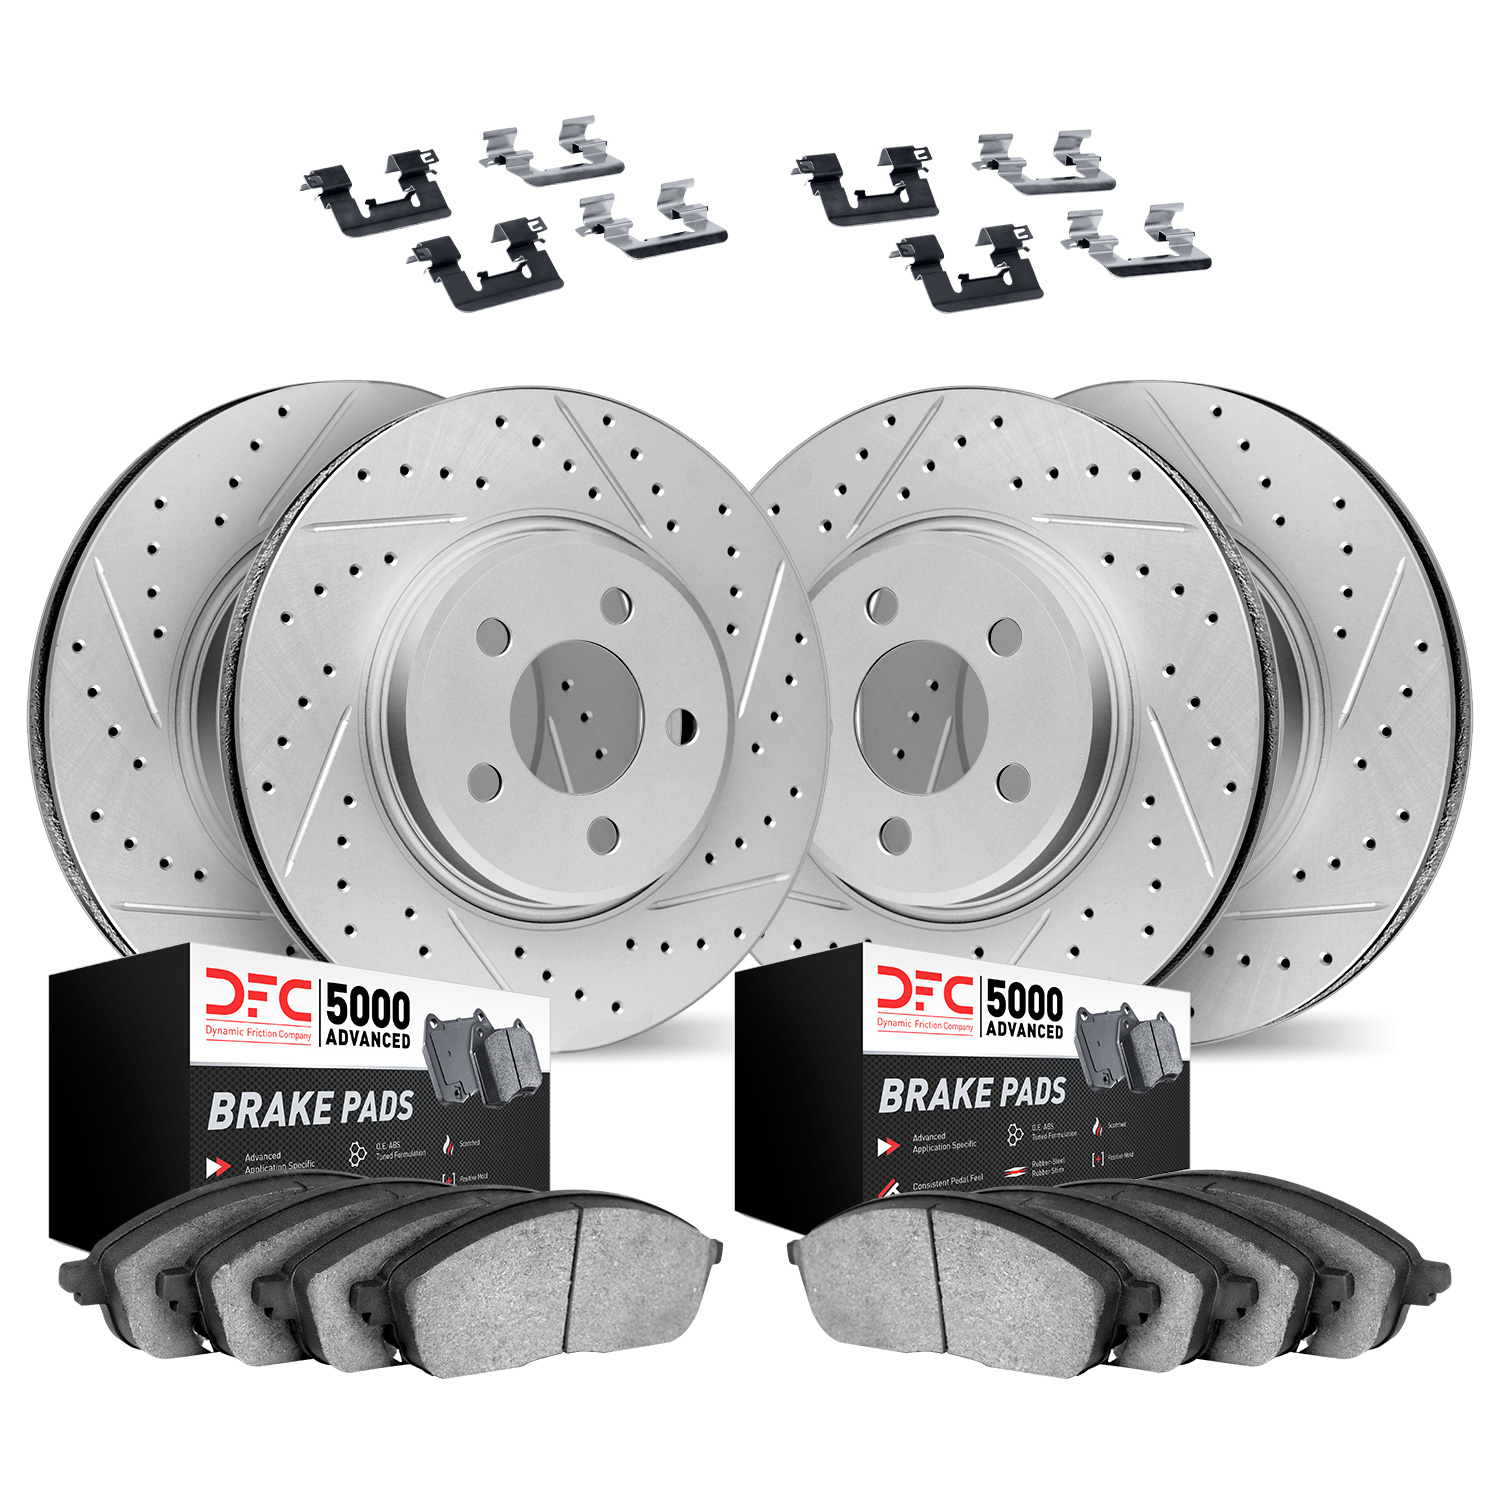 2514-11011 Geoperformance Drilled/Slotted Rotors w/5000 Advanced Brake Pads Kit & Hardware, 2018-2021 Land Rover, Position: Fron